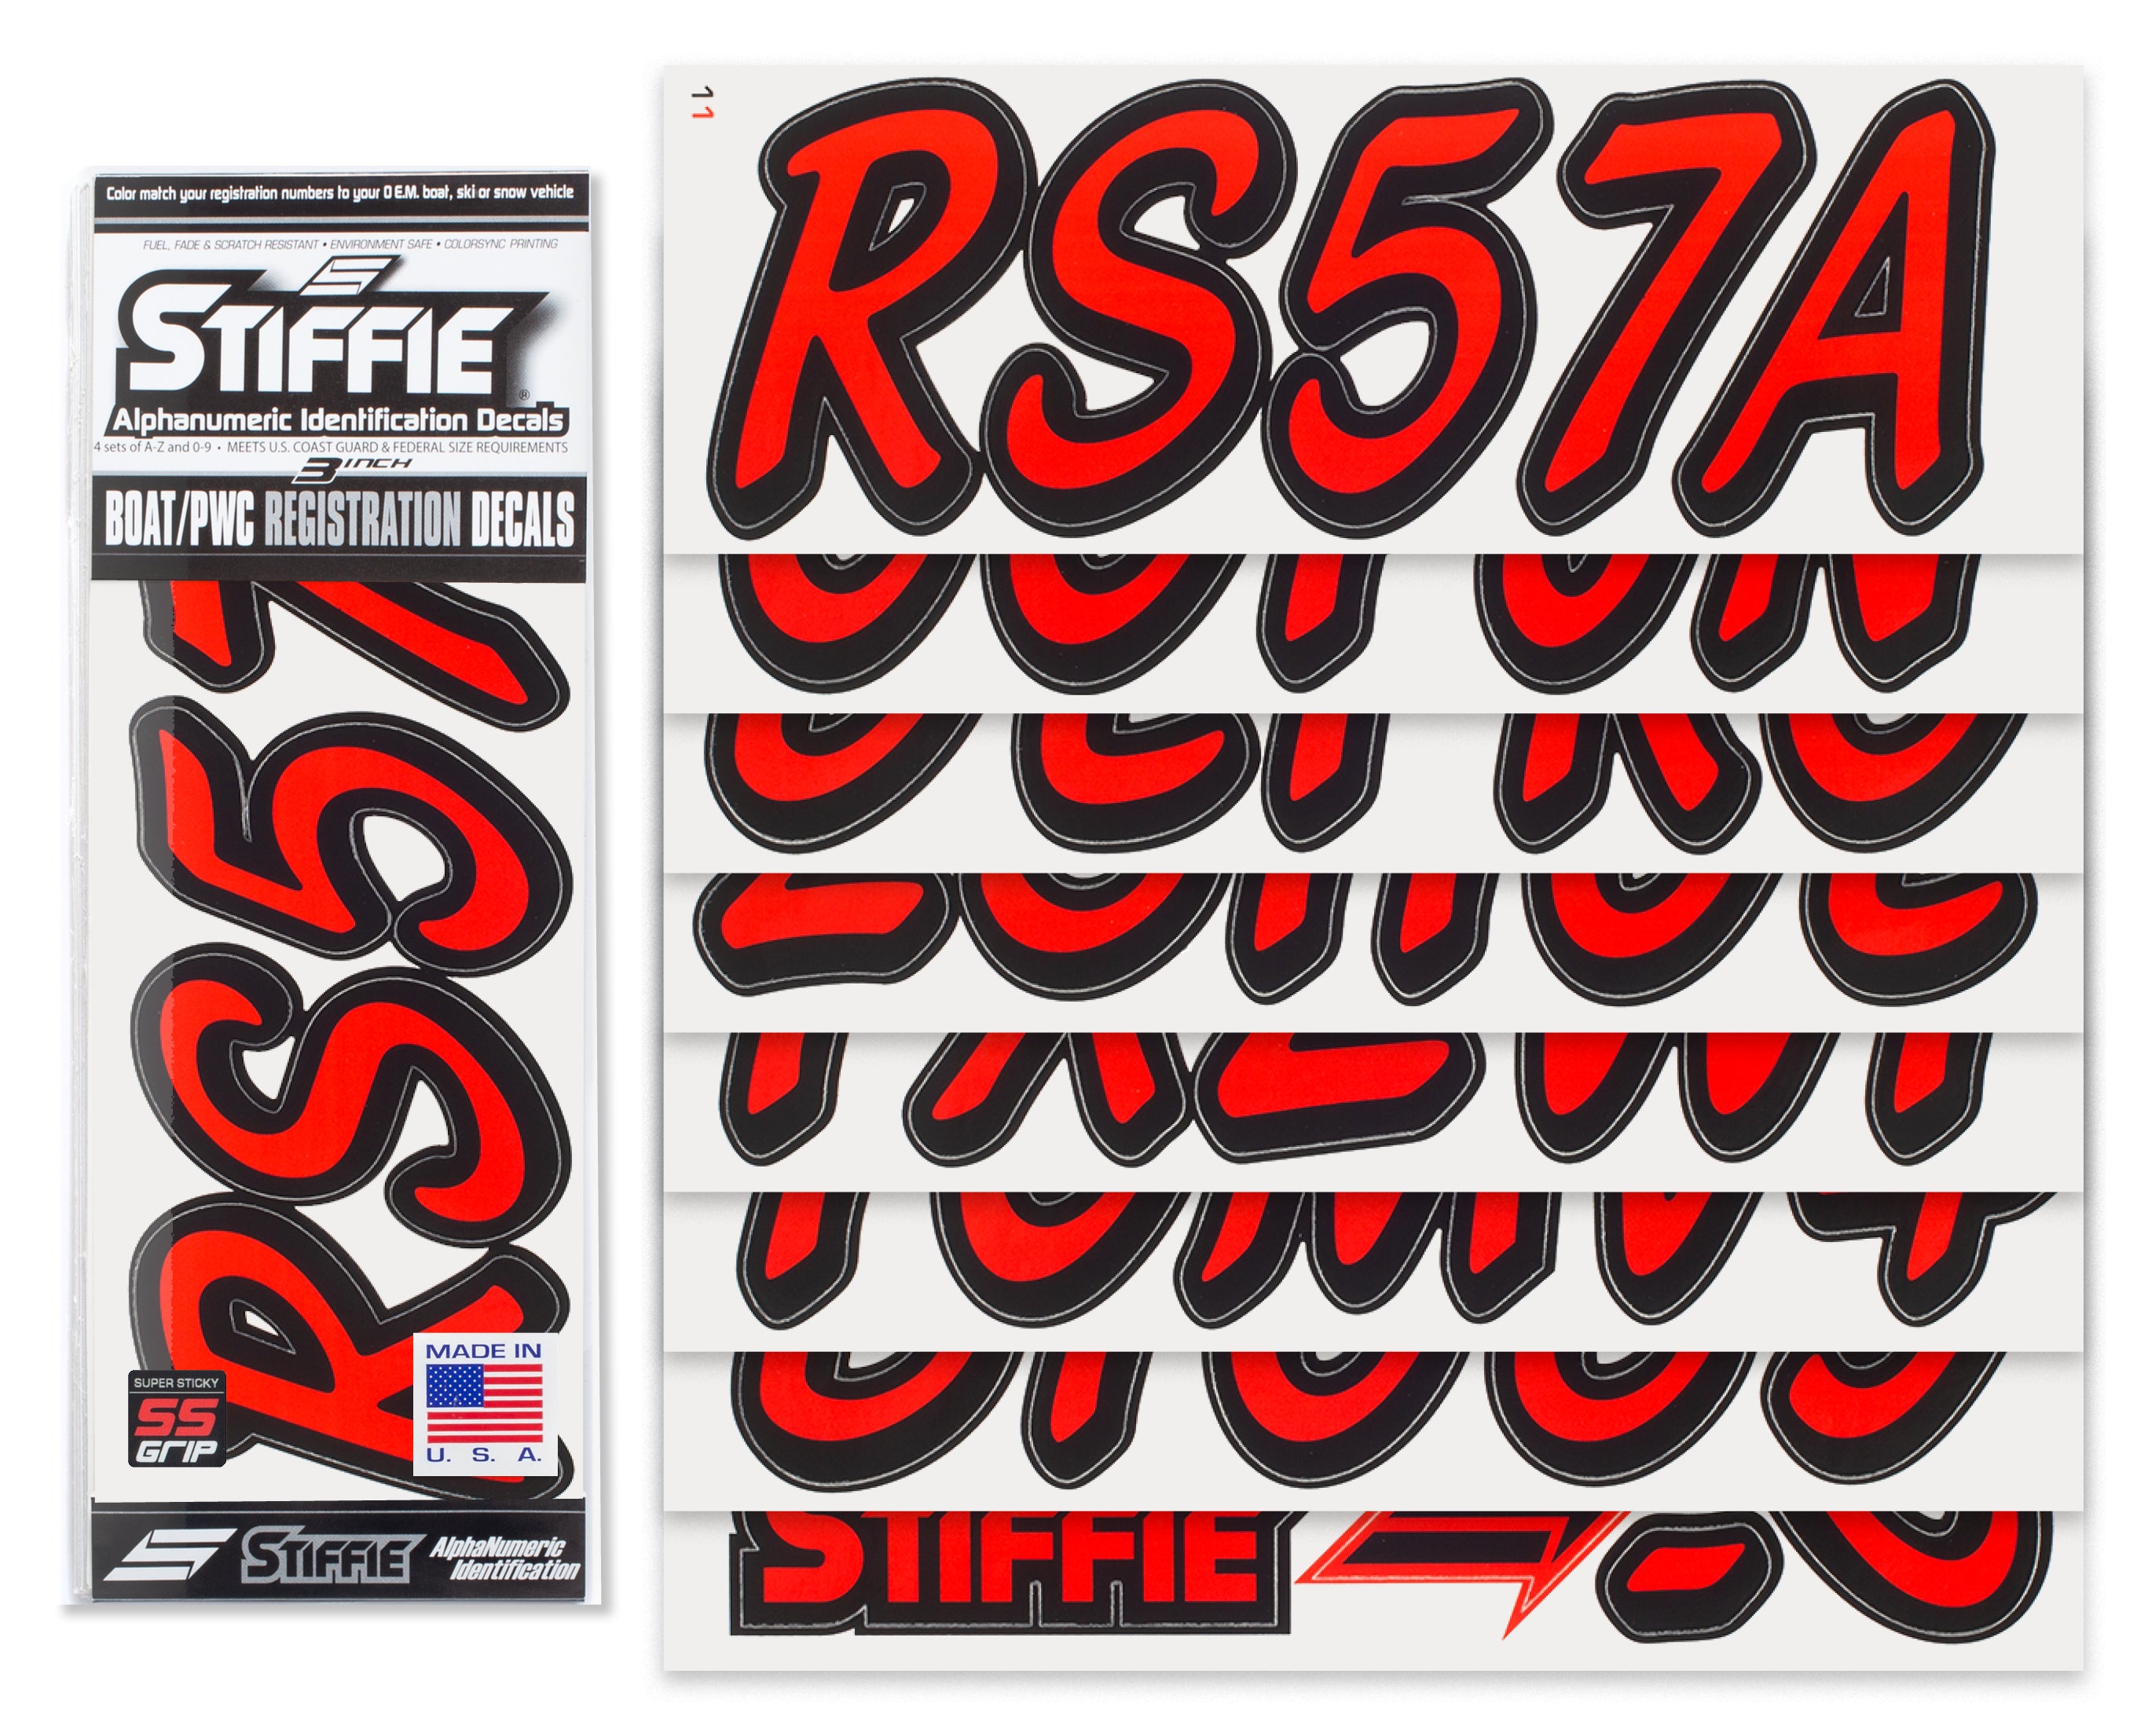 STIFFIE Whipline Solid Lava Red/Black Super Sticky 3" Alpha-Numeric Registration Identification Numbers Stickers Decals for Boats & Personal Watercraft